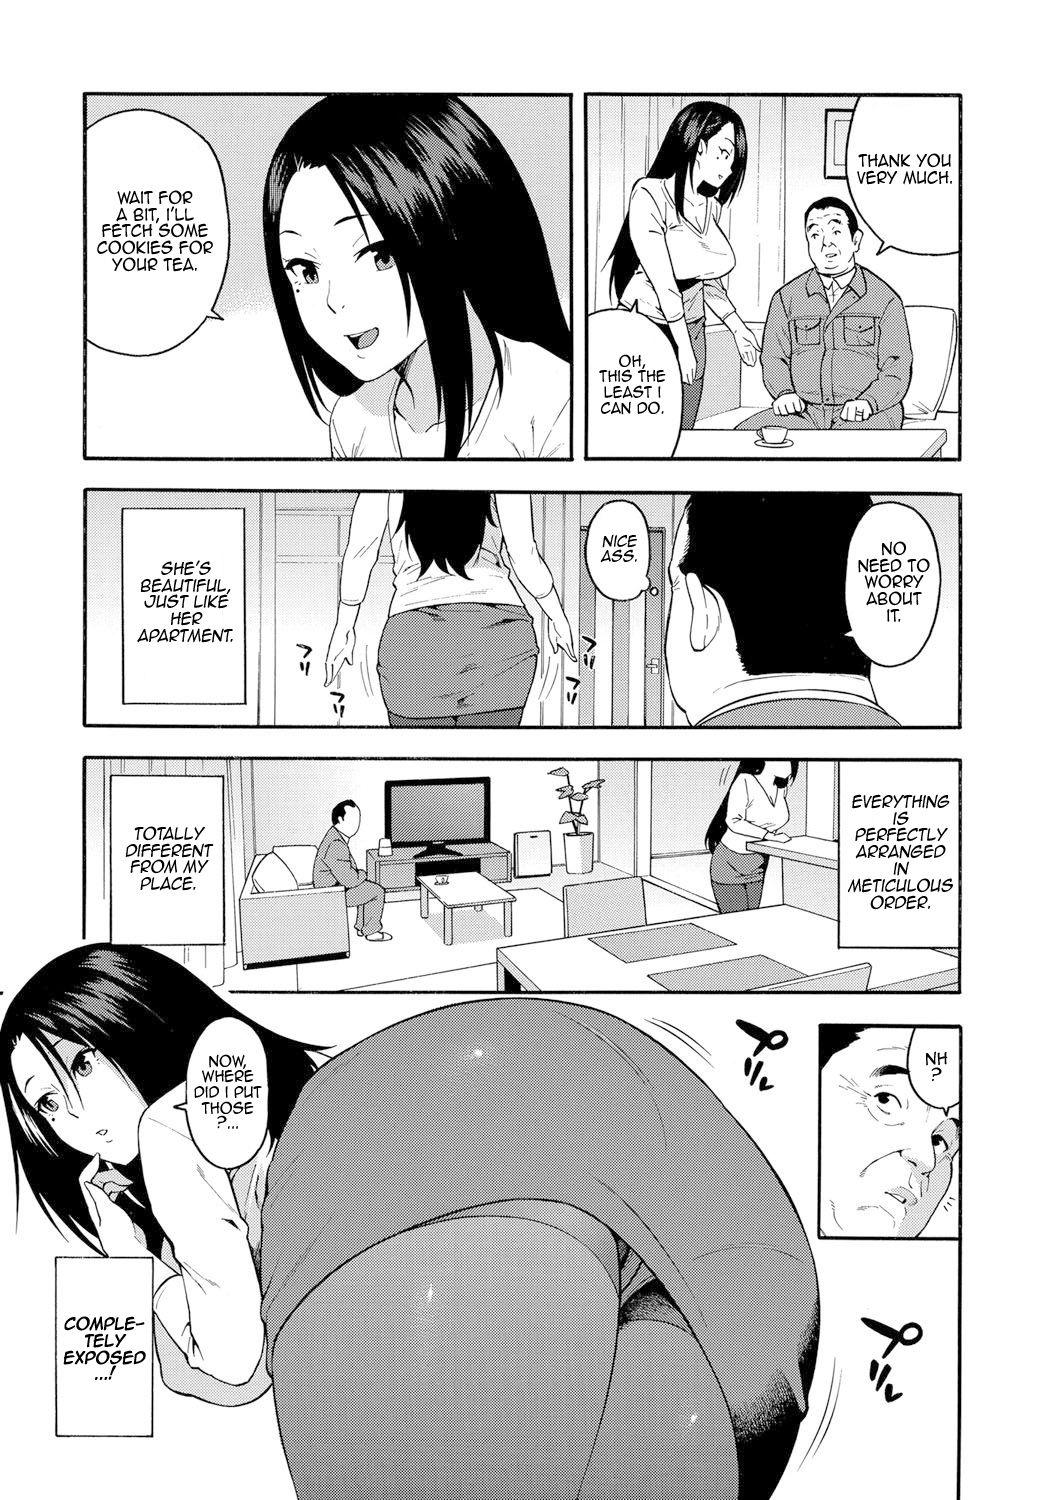 Cock 15-nengo no Onna | The Girl From 15 Years Ago Camwhore - Page 5